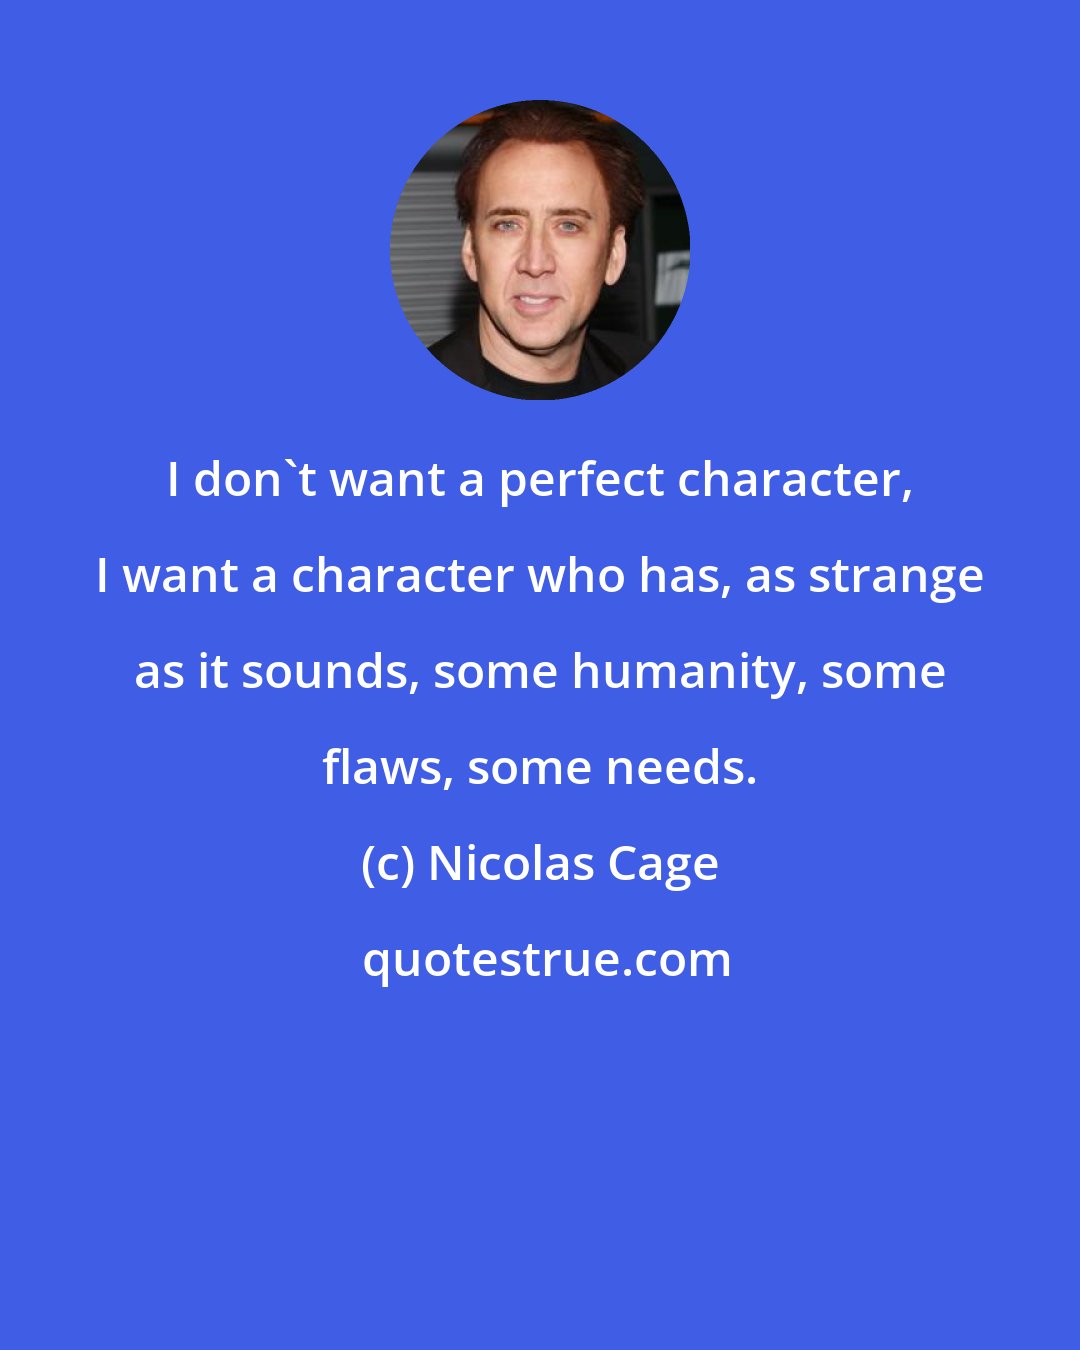 Nicolas Cage: I don't want a perfect character, I want a character who has, as strange as it sounds, some humanity, some flaws, some needs.